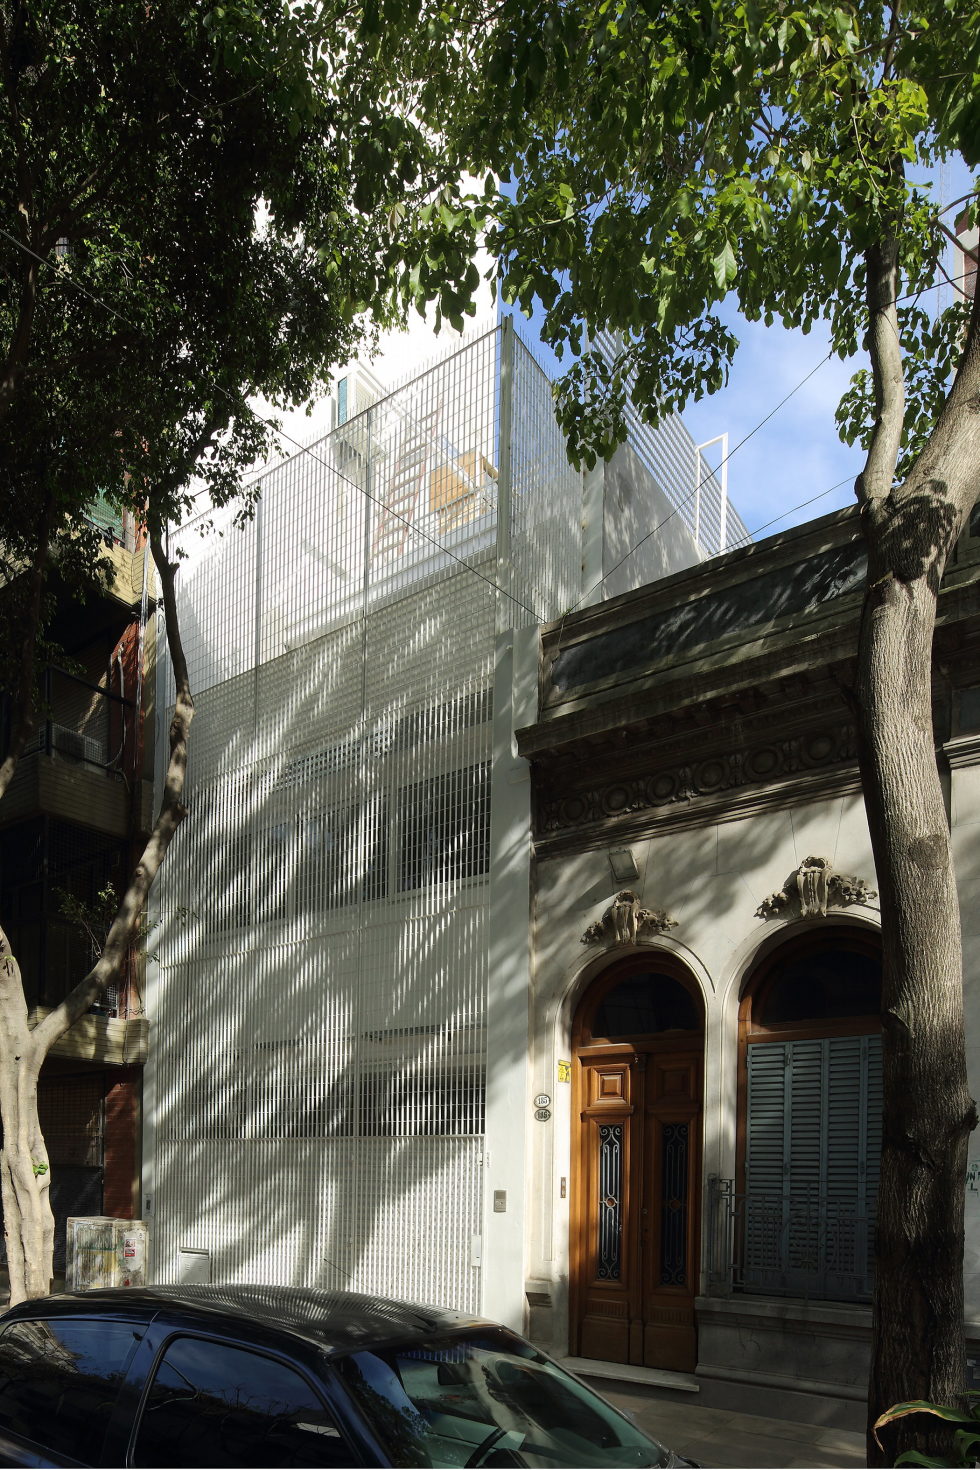 Jauretche House In Buenos Aires upon the project of Colle-Croce 2